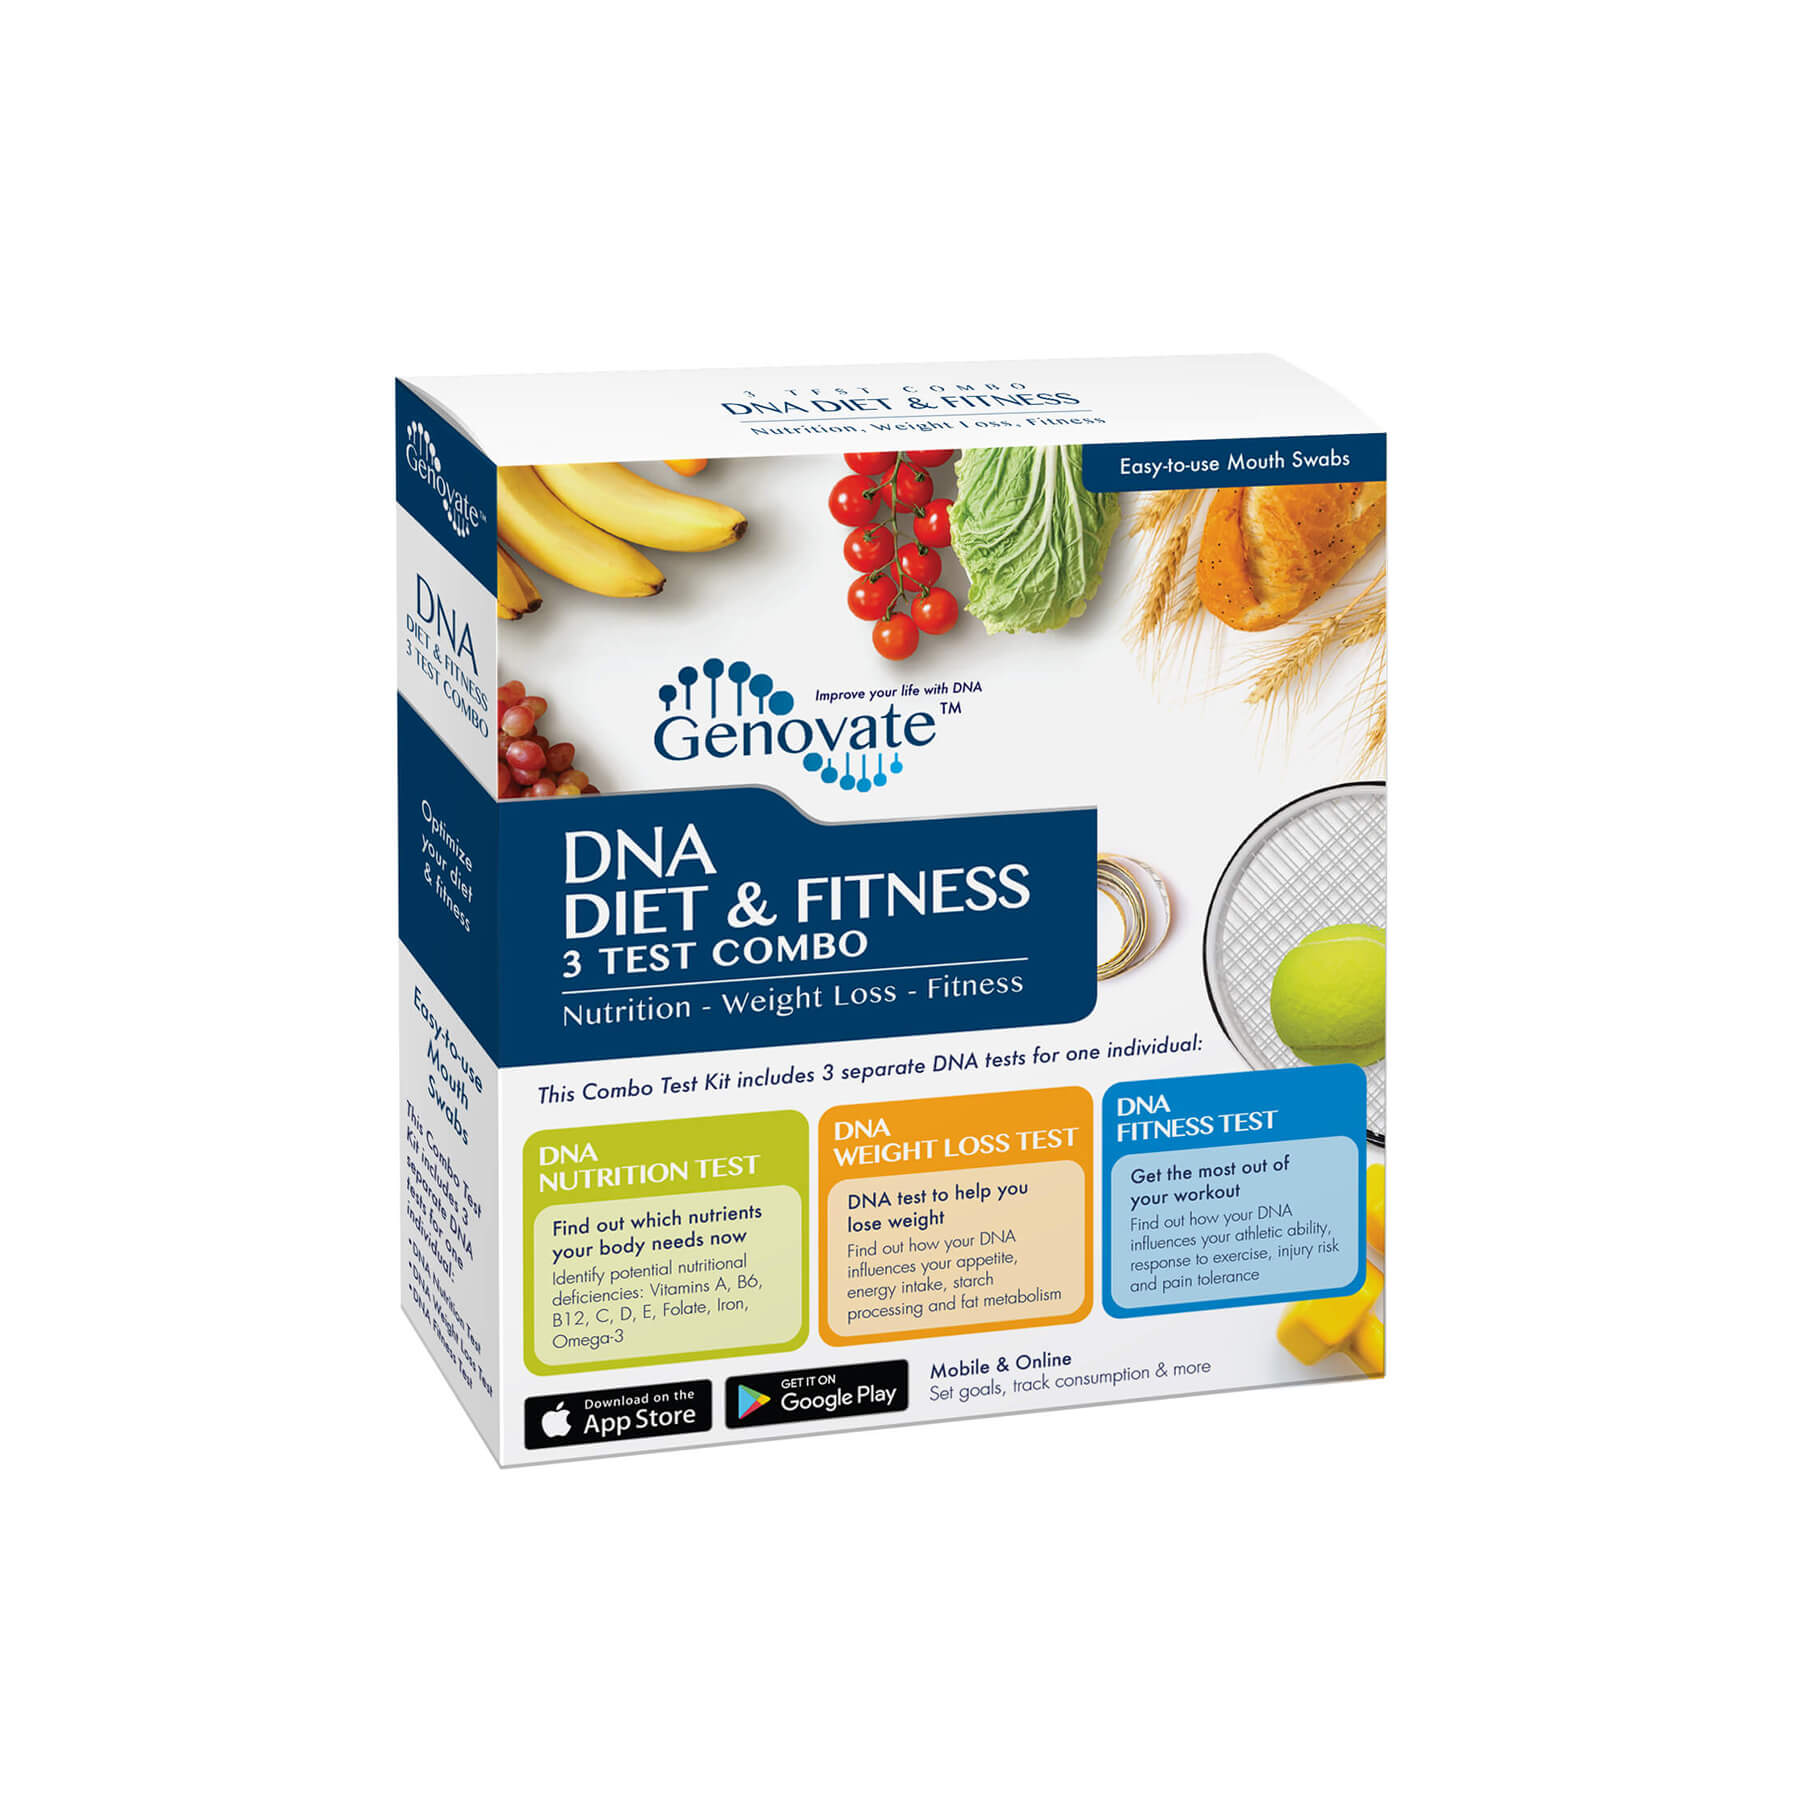 DNA Diet & Fitness 3 Test Combo - Precision Lab Works 